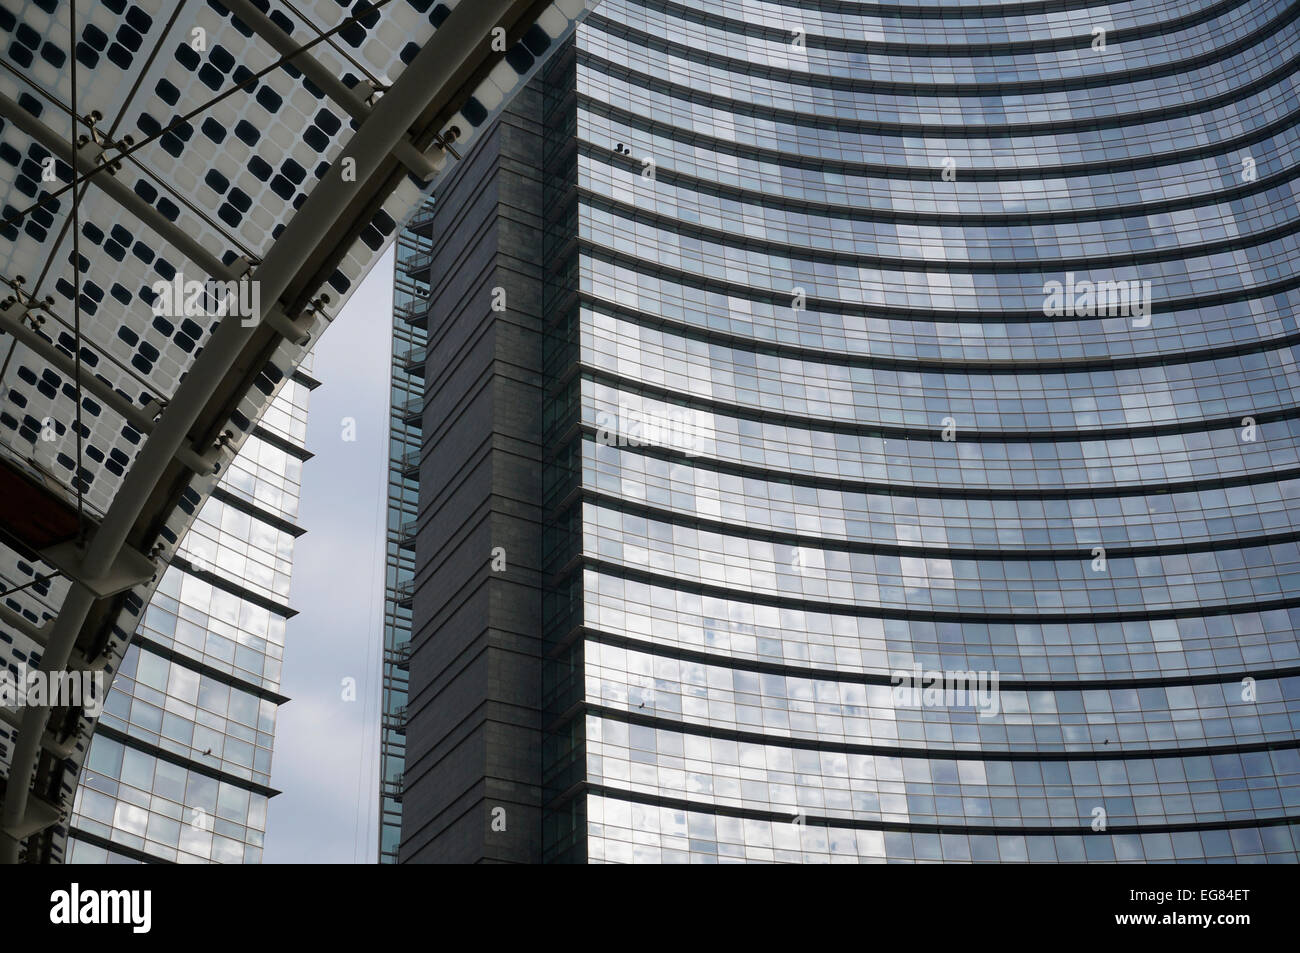 detail of UniCredit Tower, headquarter of UniCredit Bank in Gae Aulenti square , Porta Nuova, Milan, Italy Stock Photo